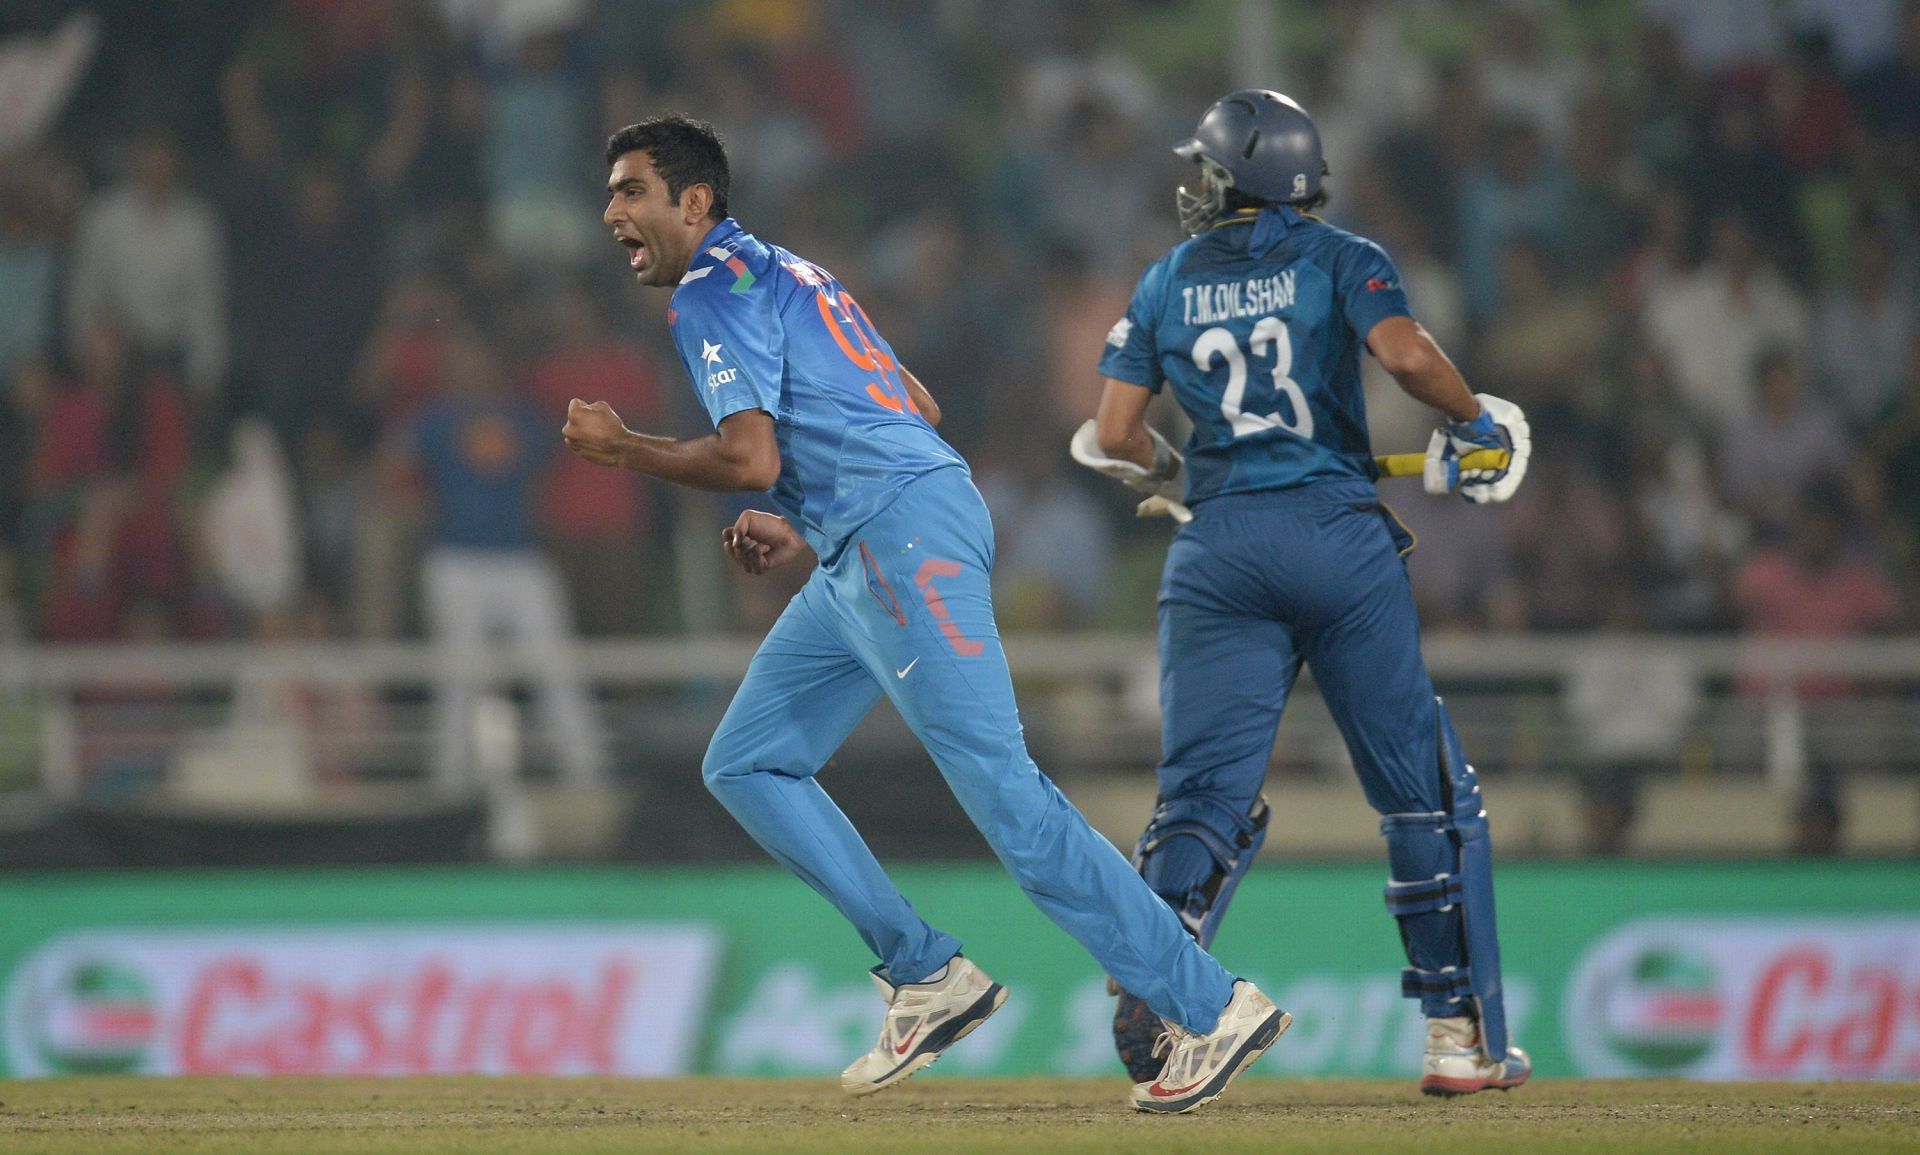 Ashwin celebrates picking a wicket in the 2014 T20 World Cup final against Sri Lanka.